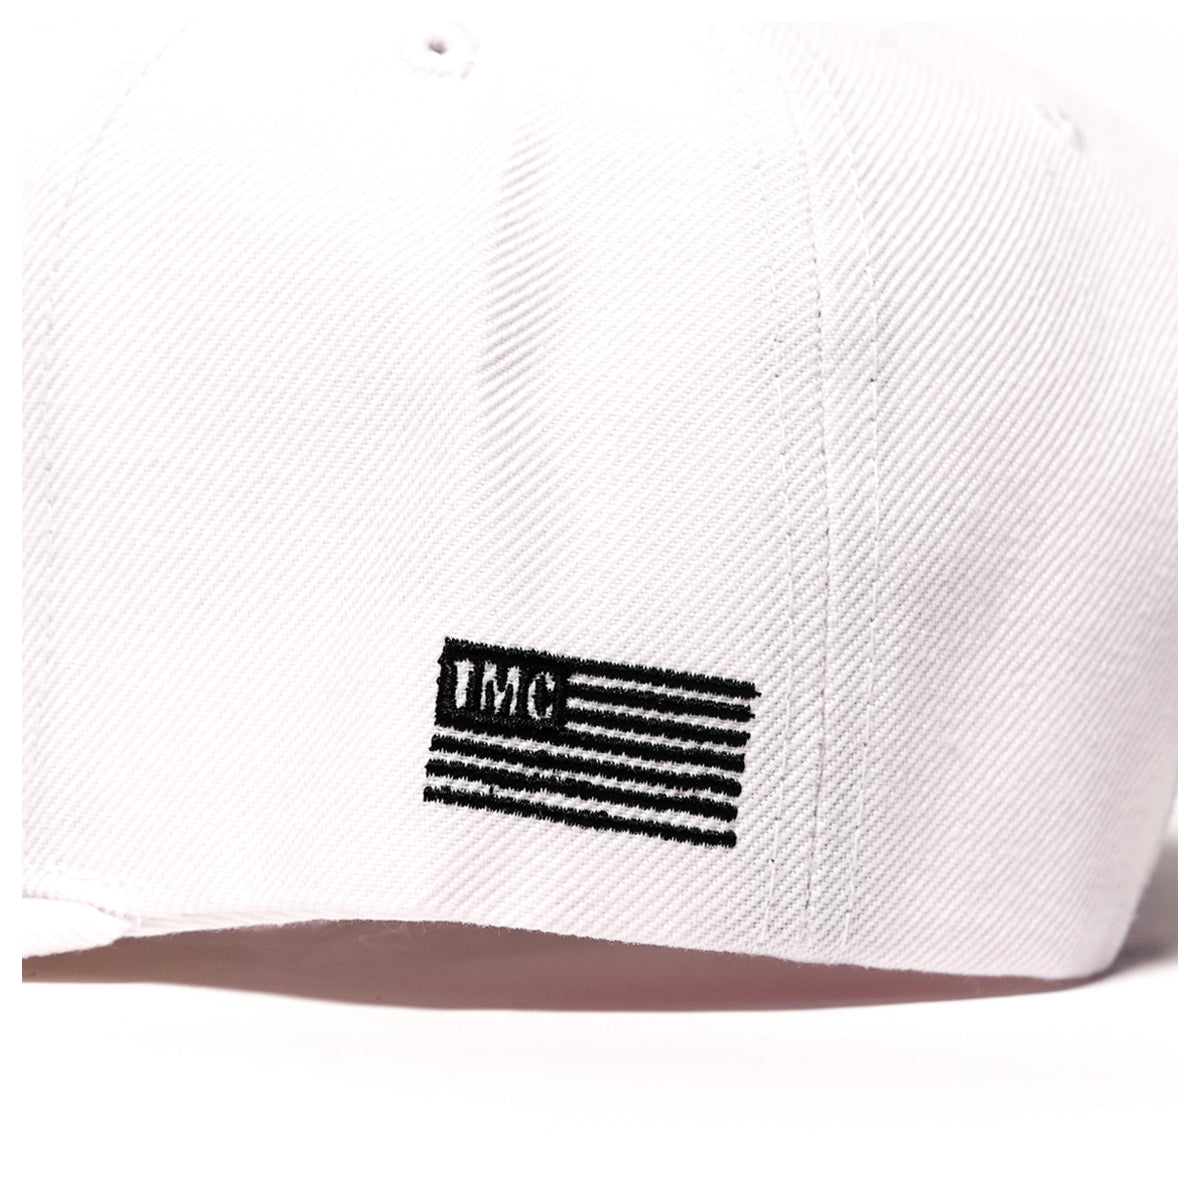 Victory Lap Limited Edition Snapback - White/Black